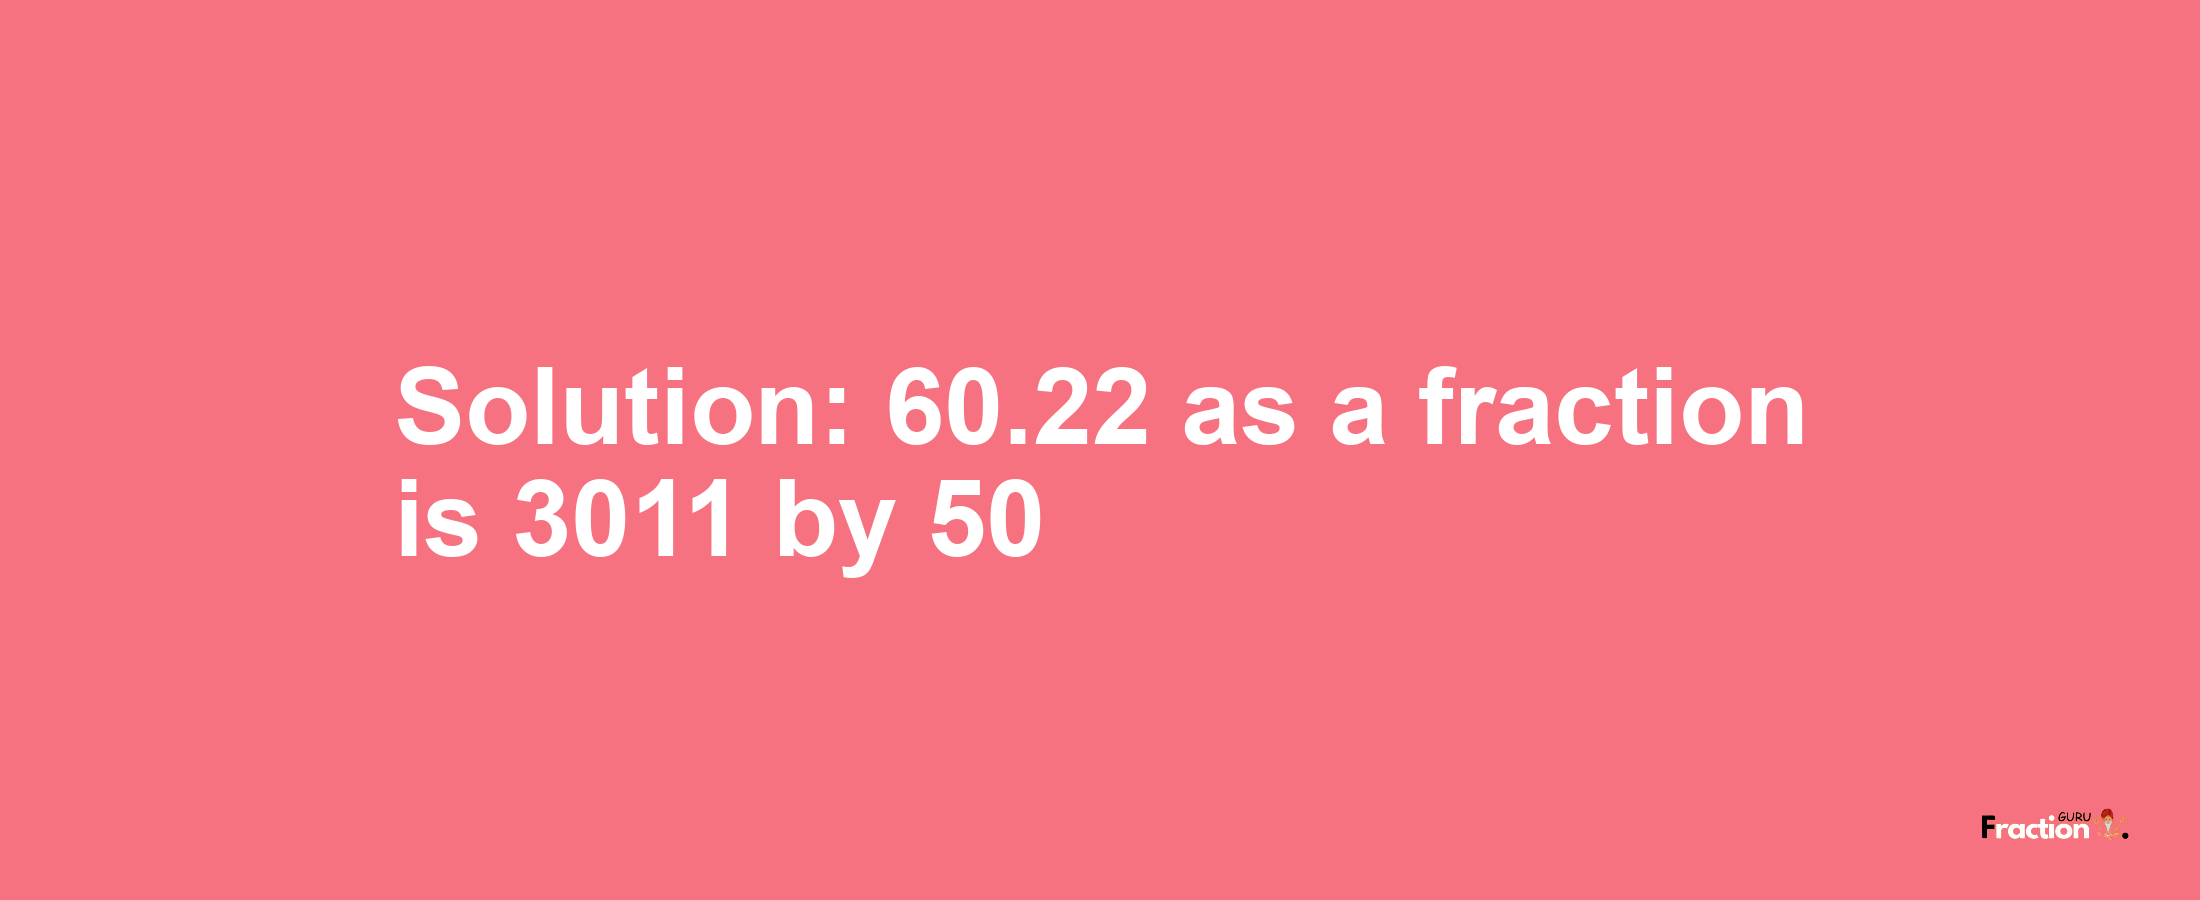 Solution:60.22 as a fraction is 3011/50